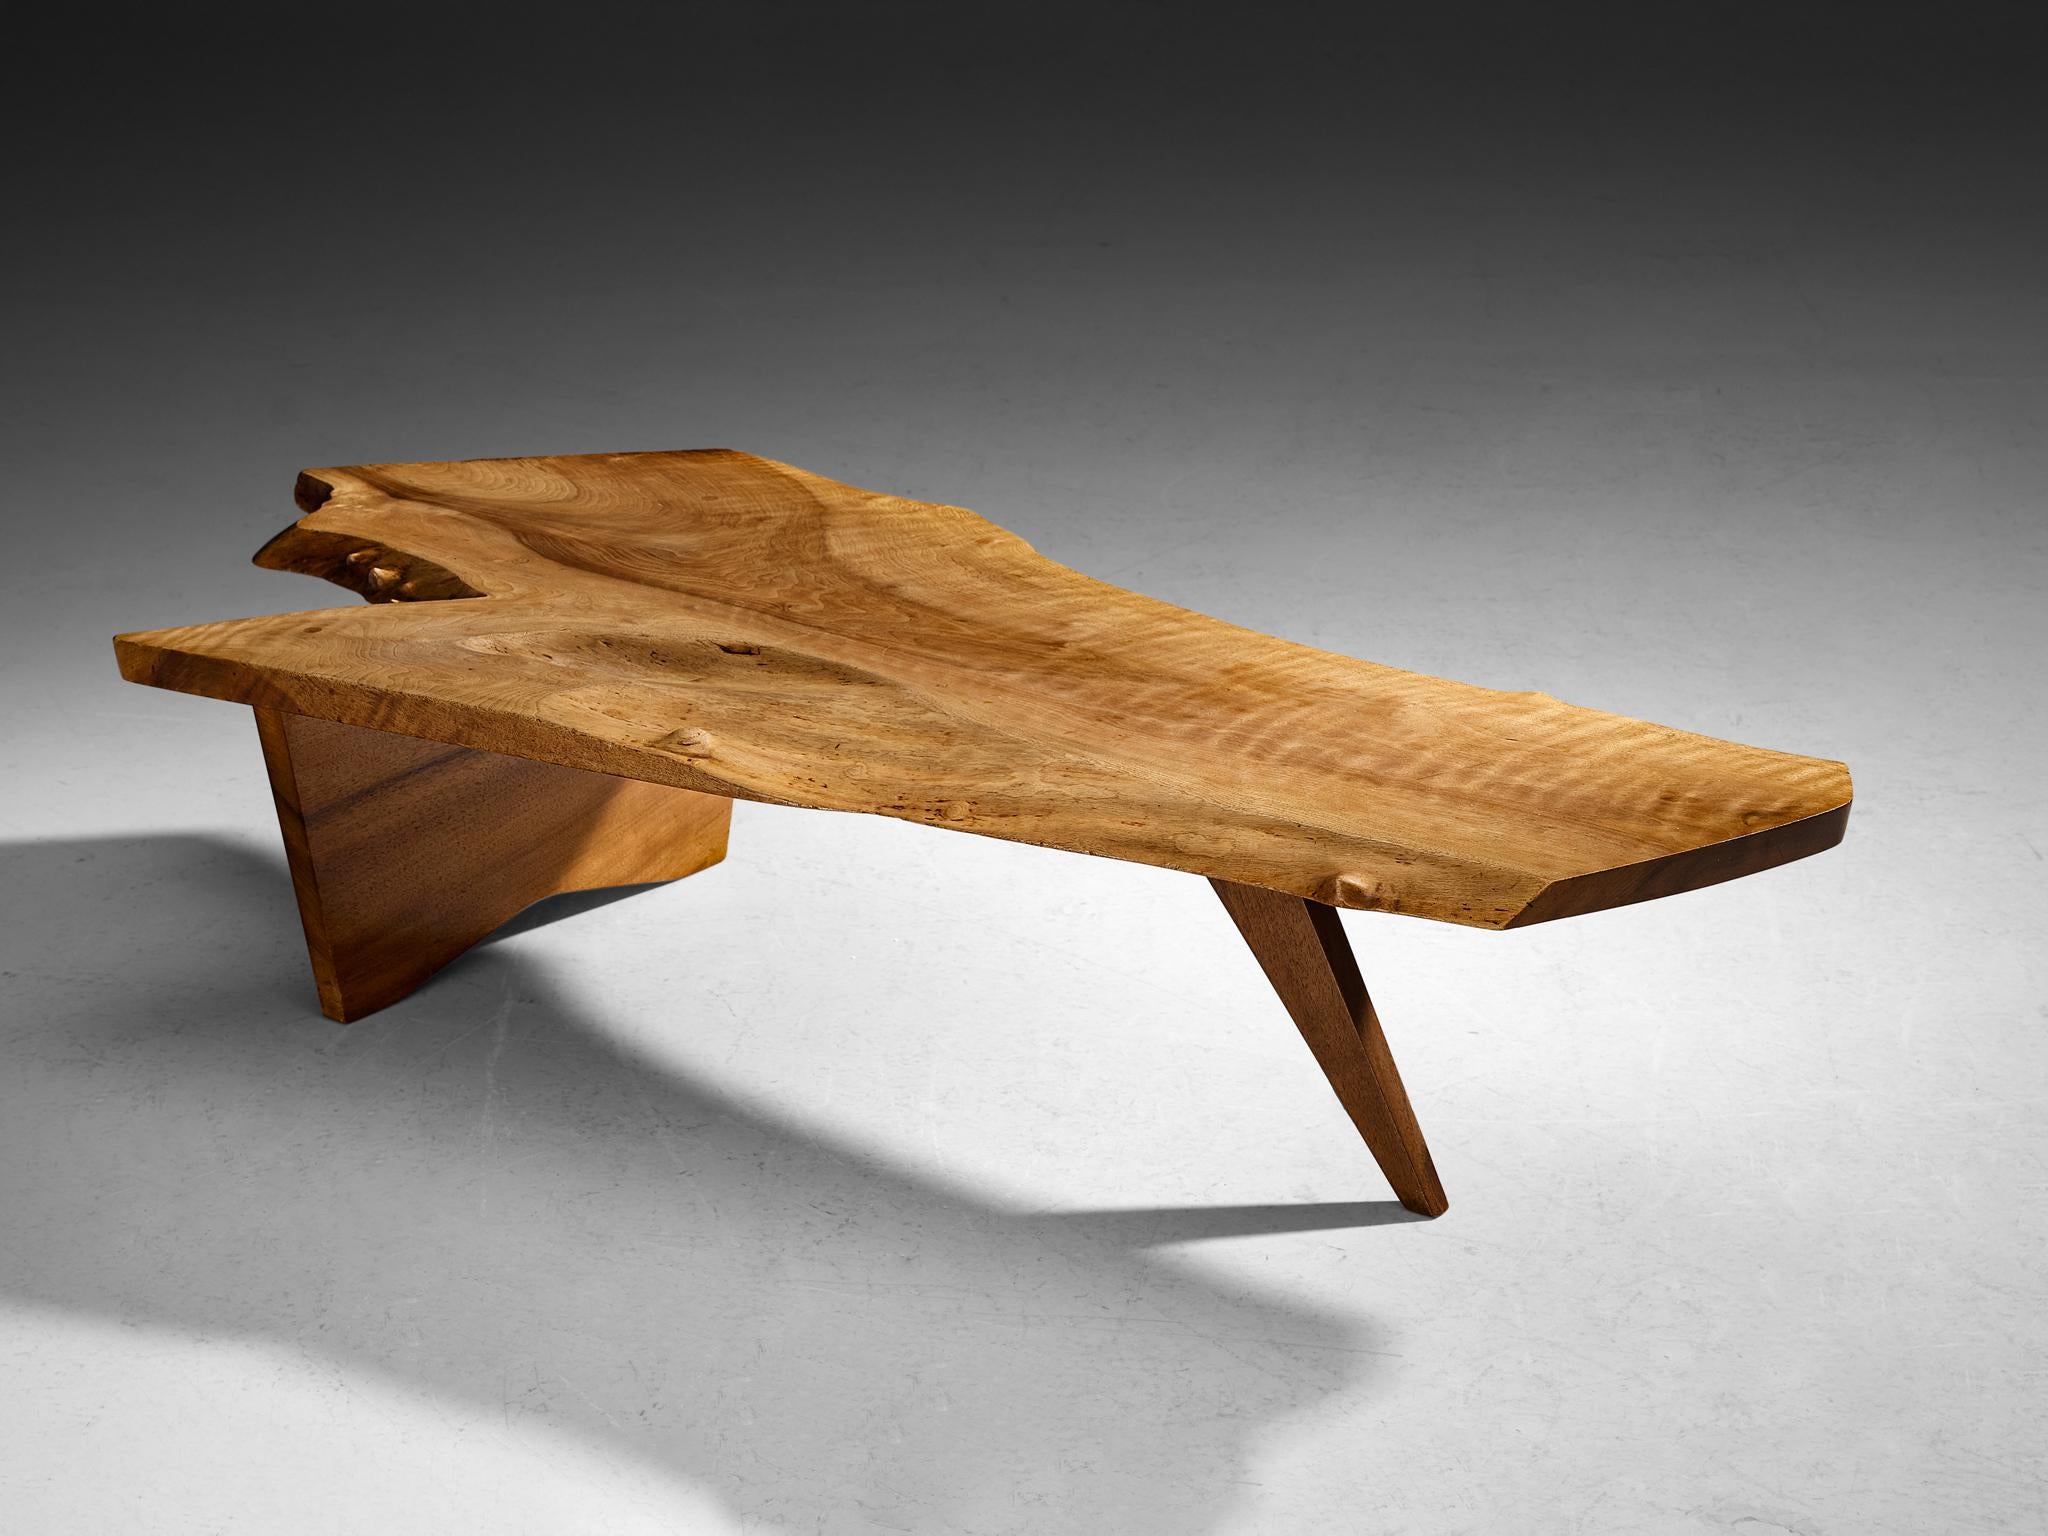 George Nakashima, free edge slab coffee table, English walnut, United States, circa 1960 

American woodworker and designer George Nakashima proves with this quintessential table that he is a true master of his craft. The impressive coffee table,